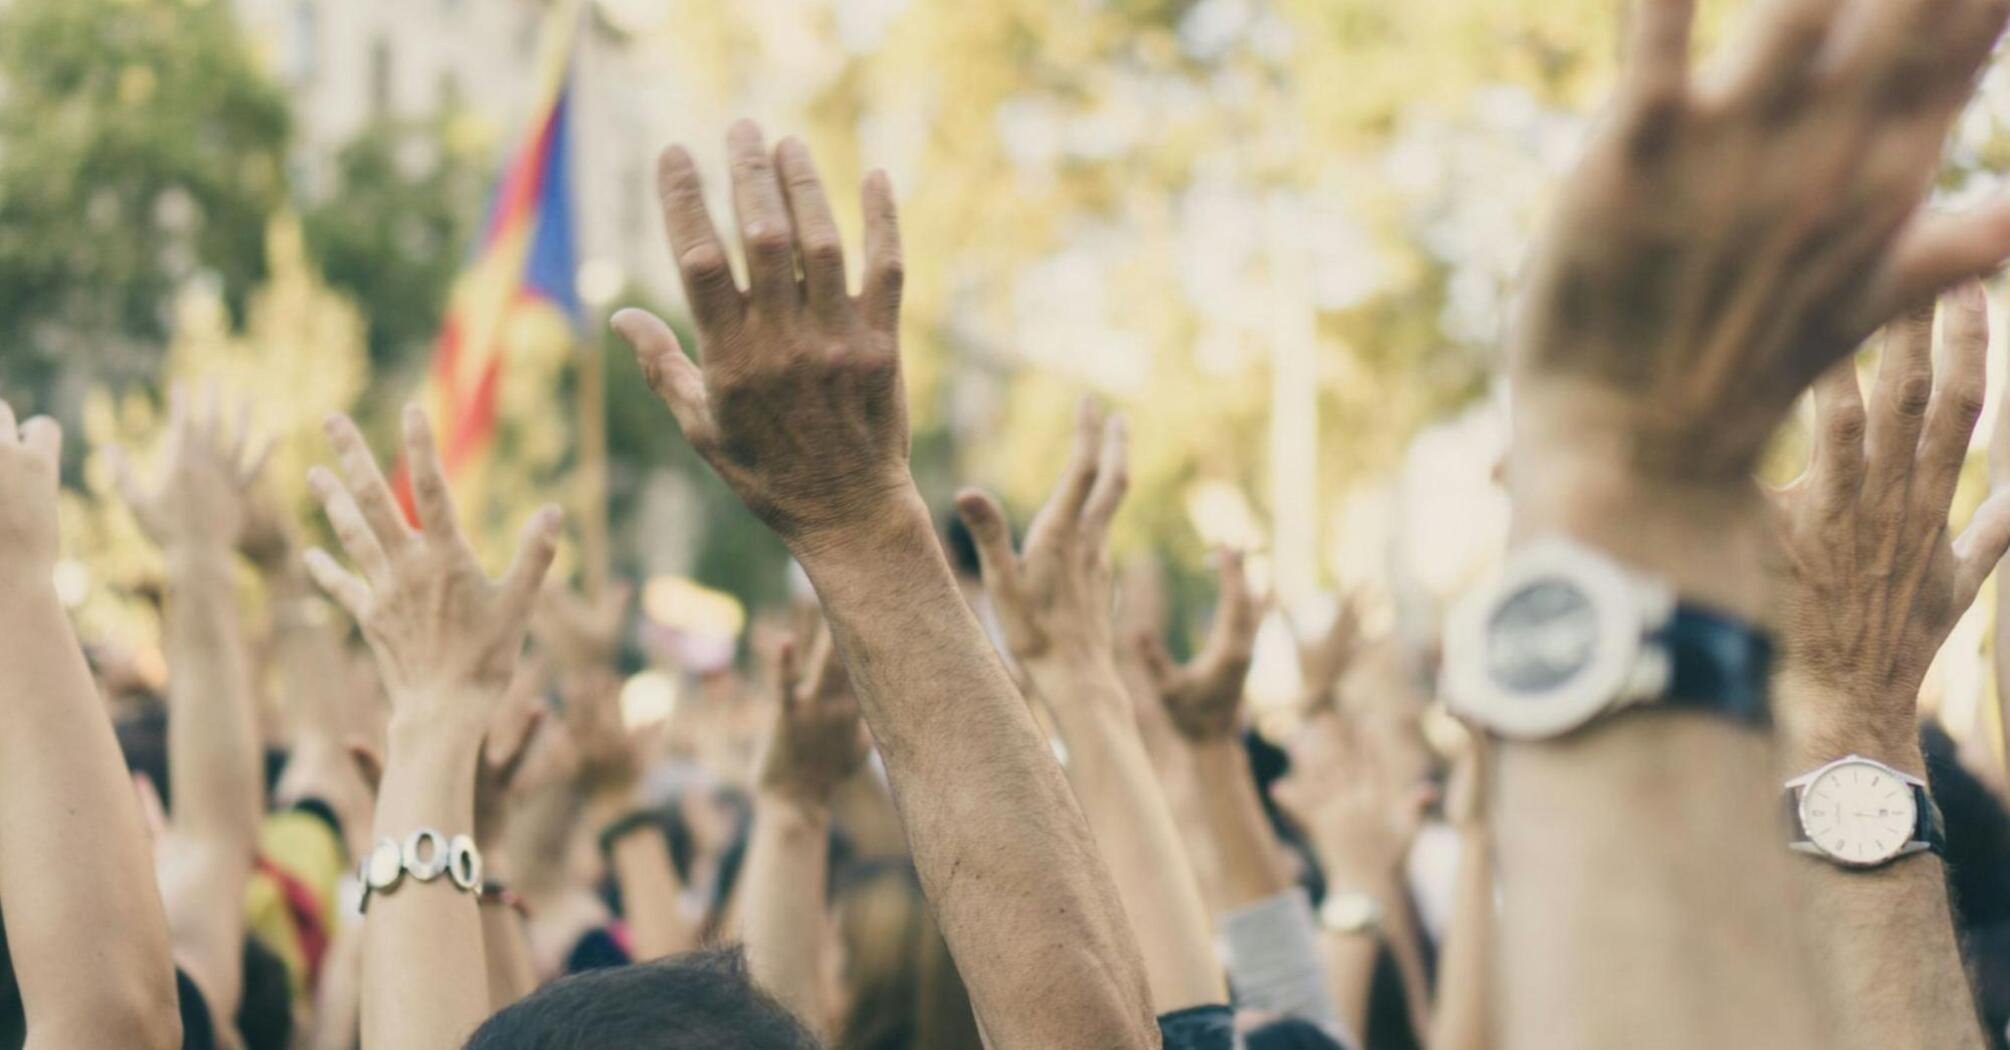 Crowd with raised hands during a protest in Spain